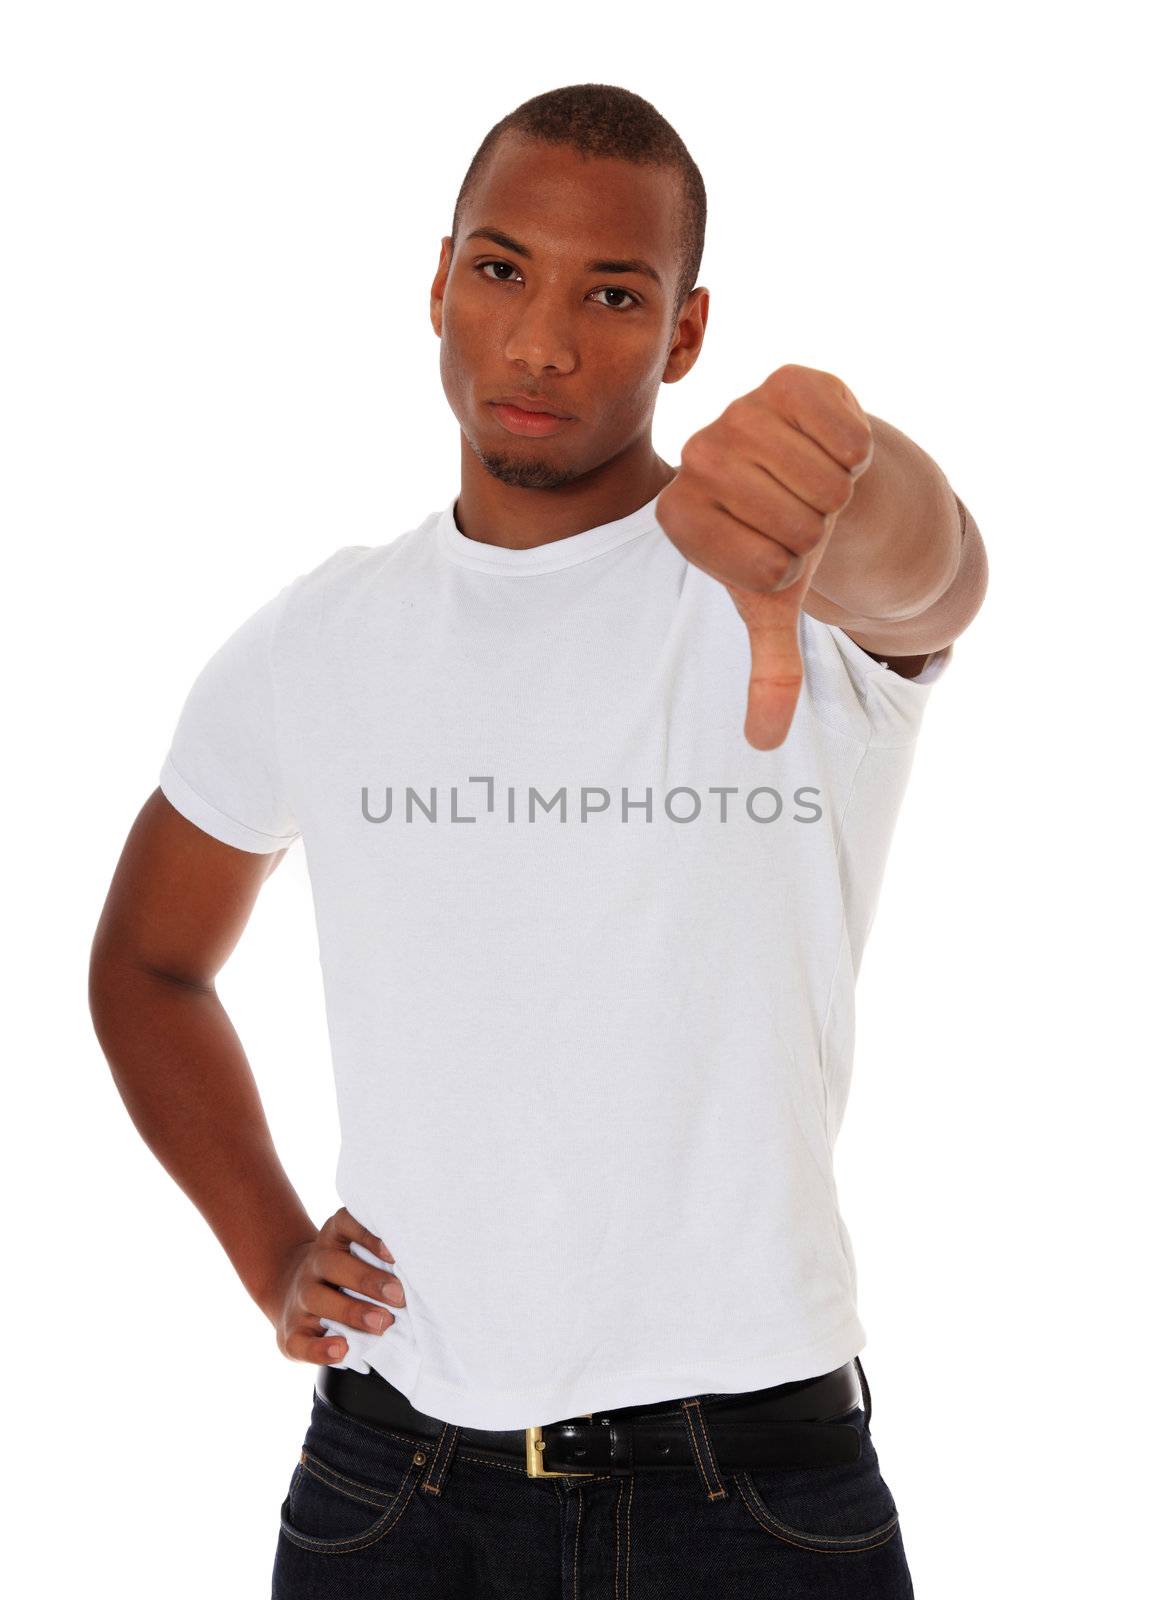 Attractive black showing thumb down. All on white background.